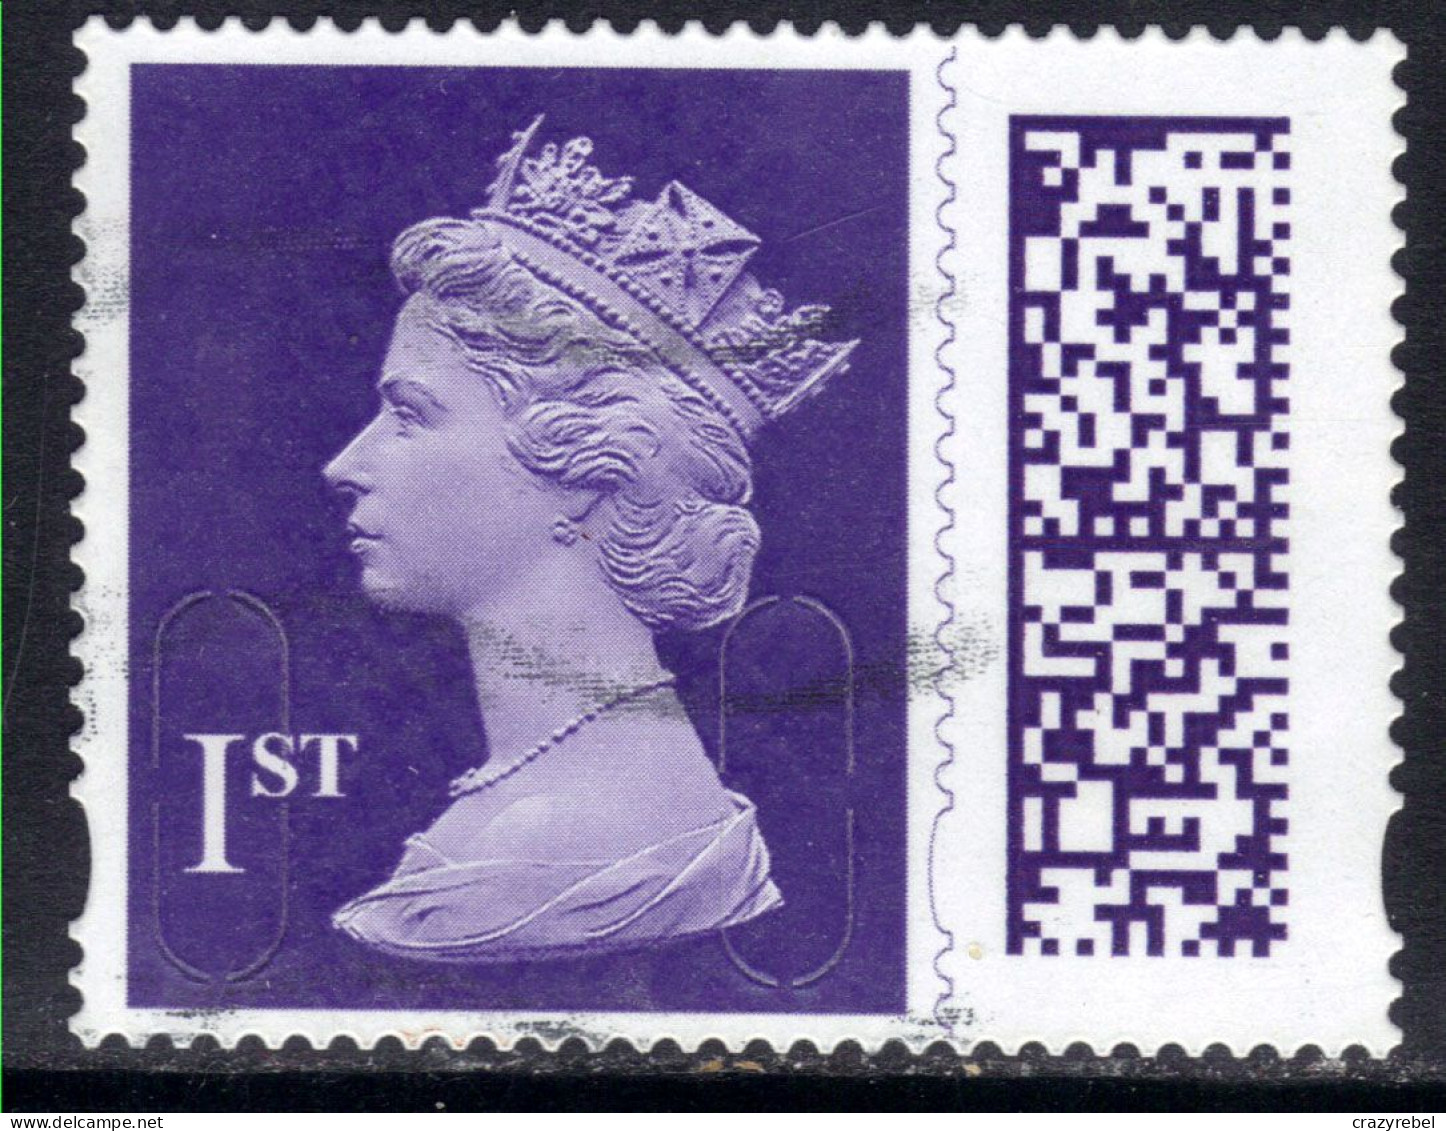 GB 2022 QE2 1st Purple Barcode Machin SG V4526 Used MAIL ( K200 ) - Used Stamps